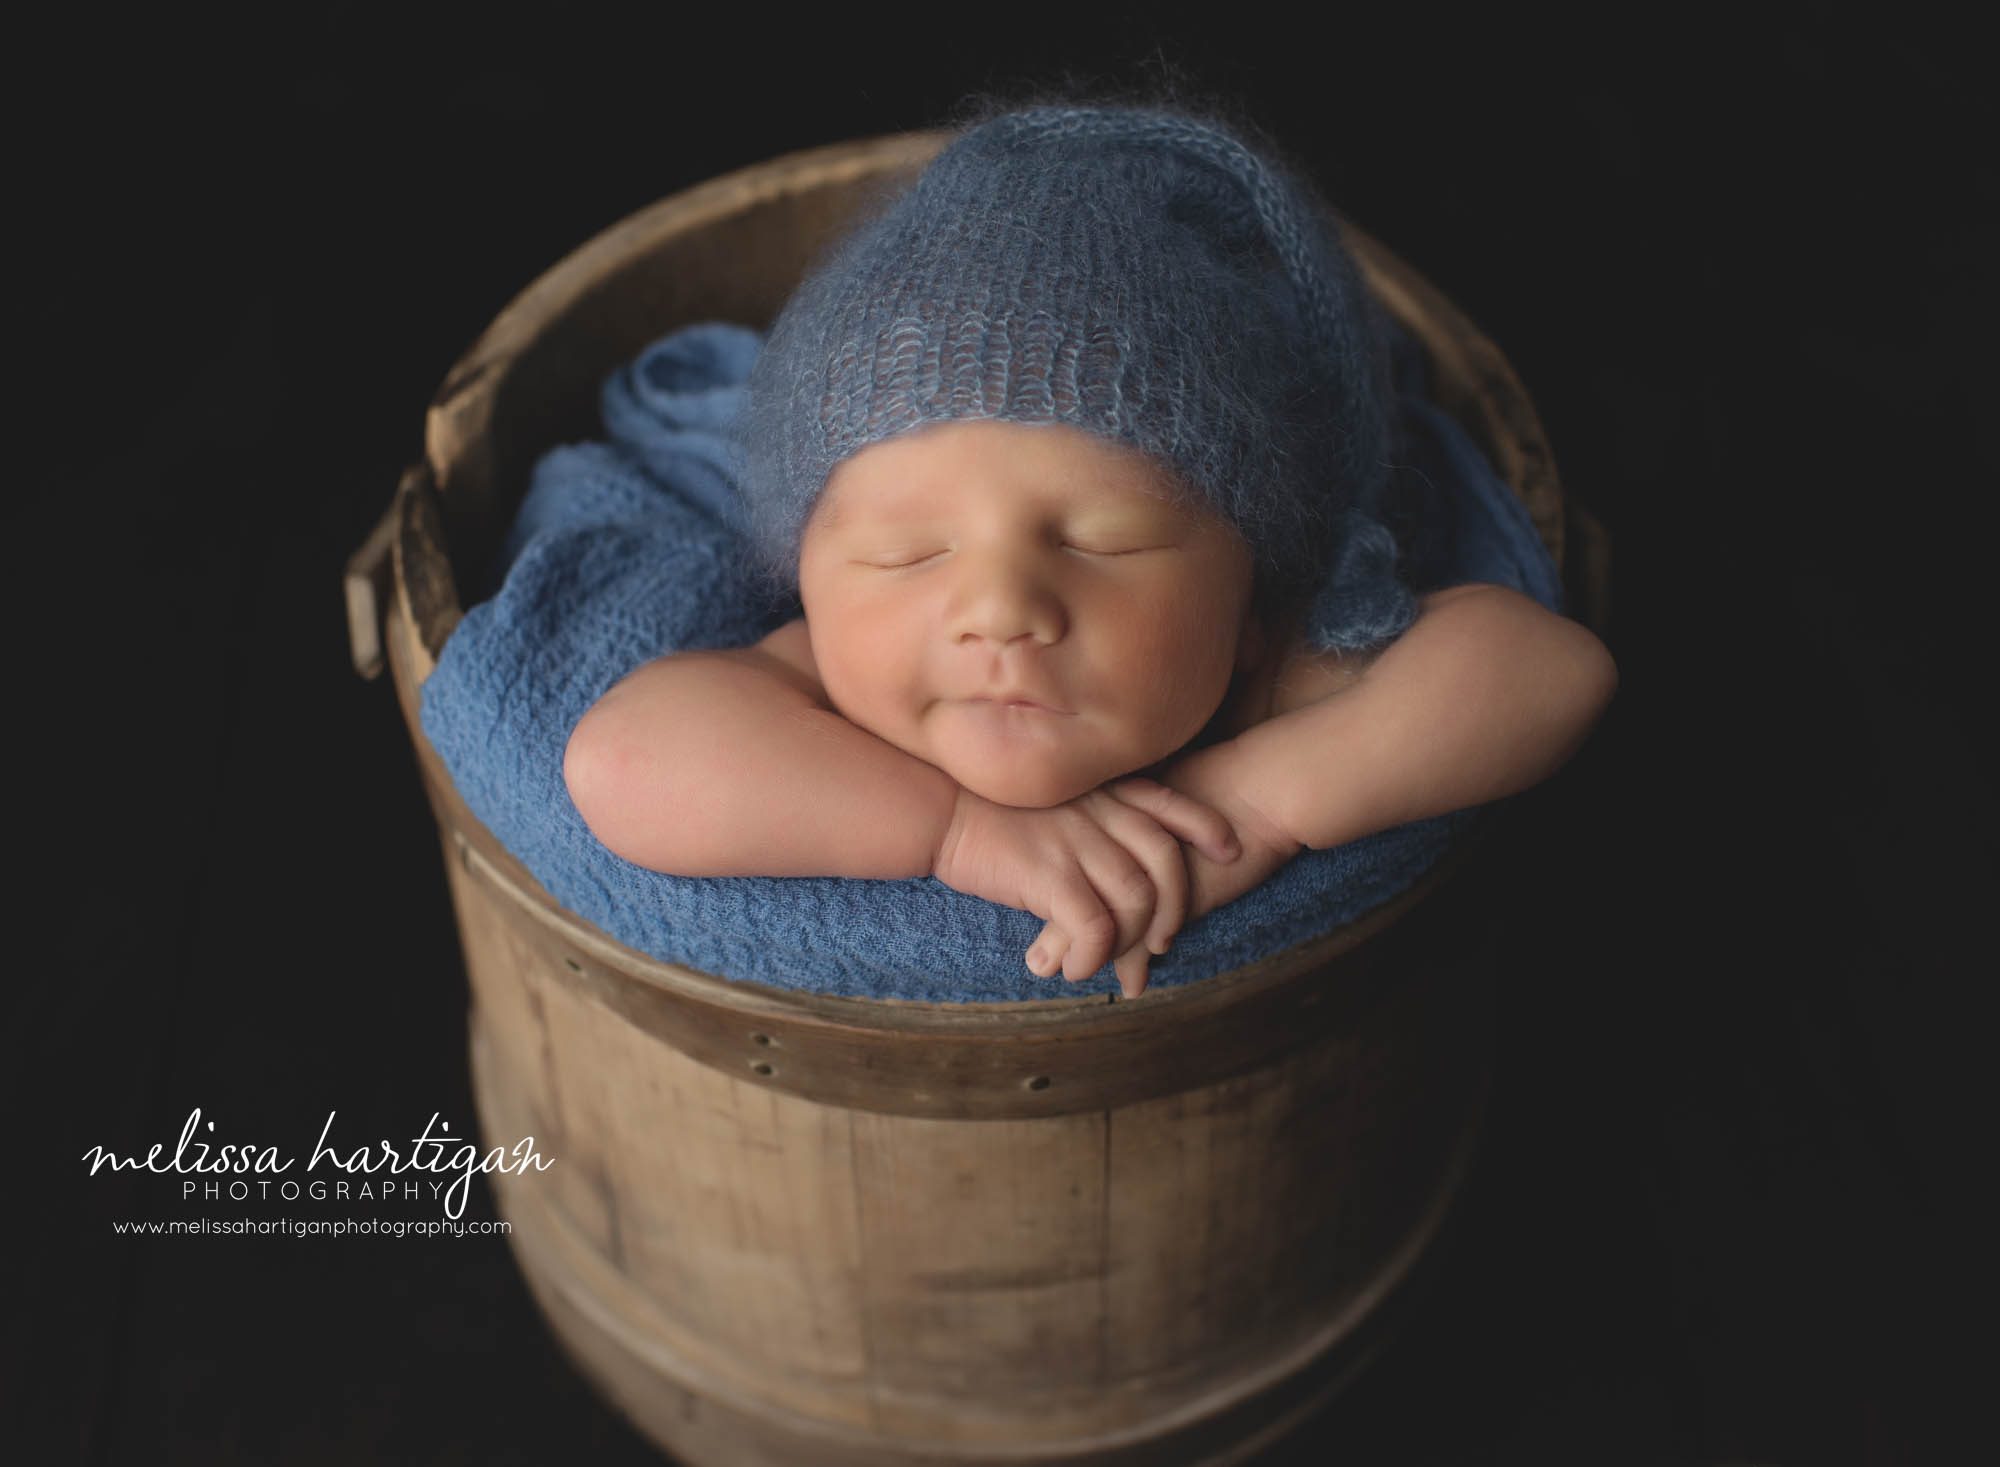 baby boy posed in wooden bucket with blue knitted sleepy cap smiling